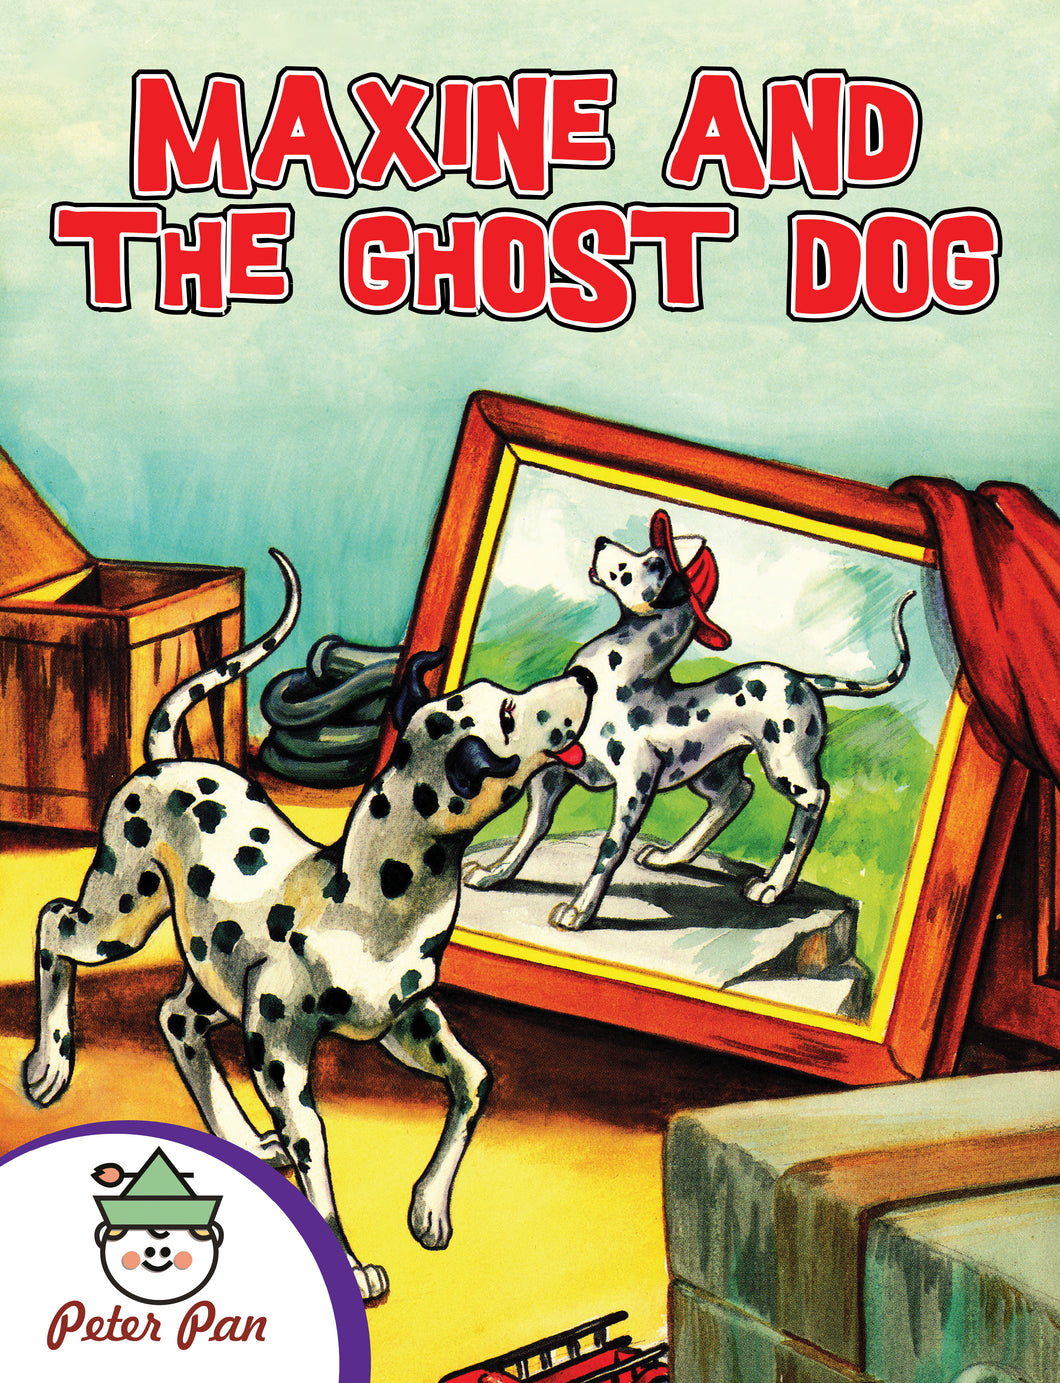 Maxine and the Ghost Dog